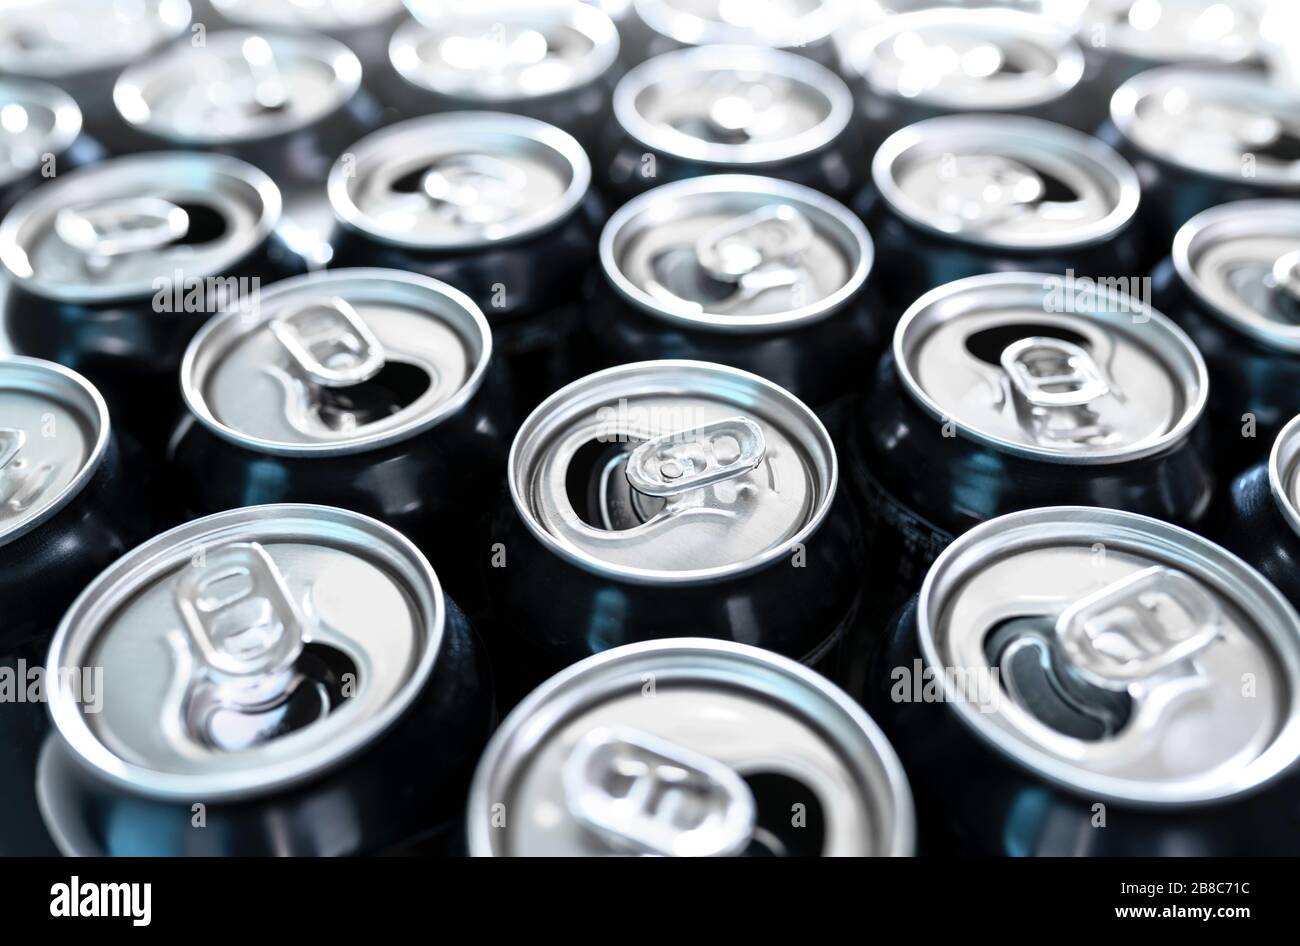 Many empty cans. A lot of opened soda, soft drink, lemonade, cola, beer or energy drink containers. Recycling, addiction or alcoholism concept. Stock Photo